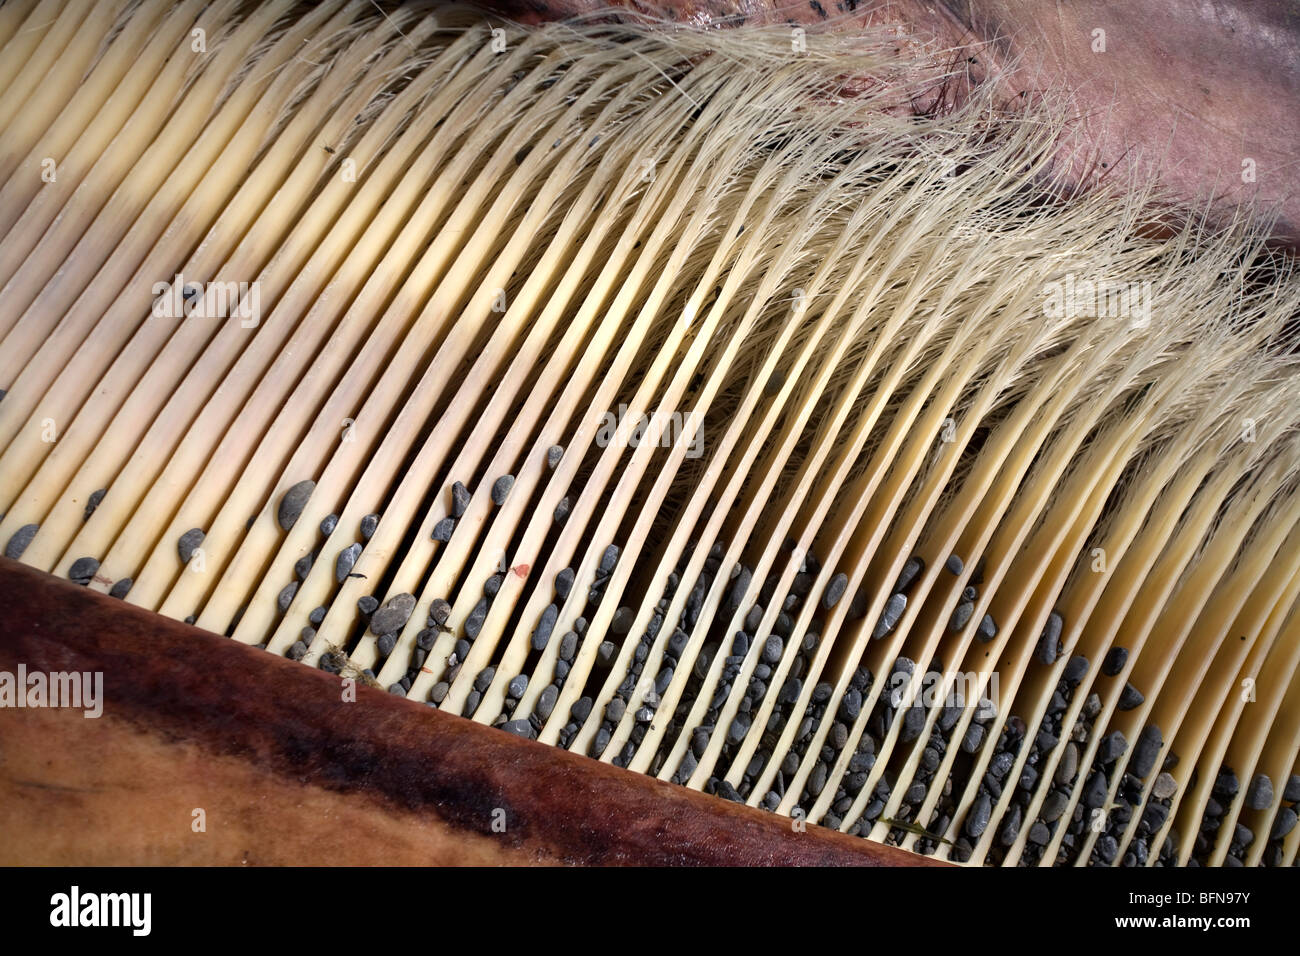 Closeup view of a a beached whale's baleen Stock Photo